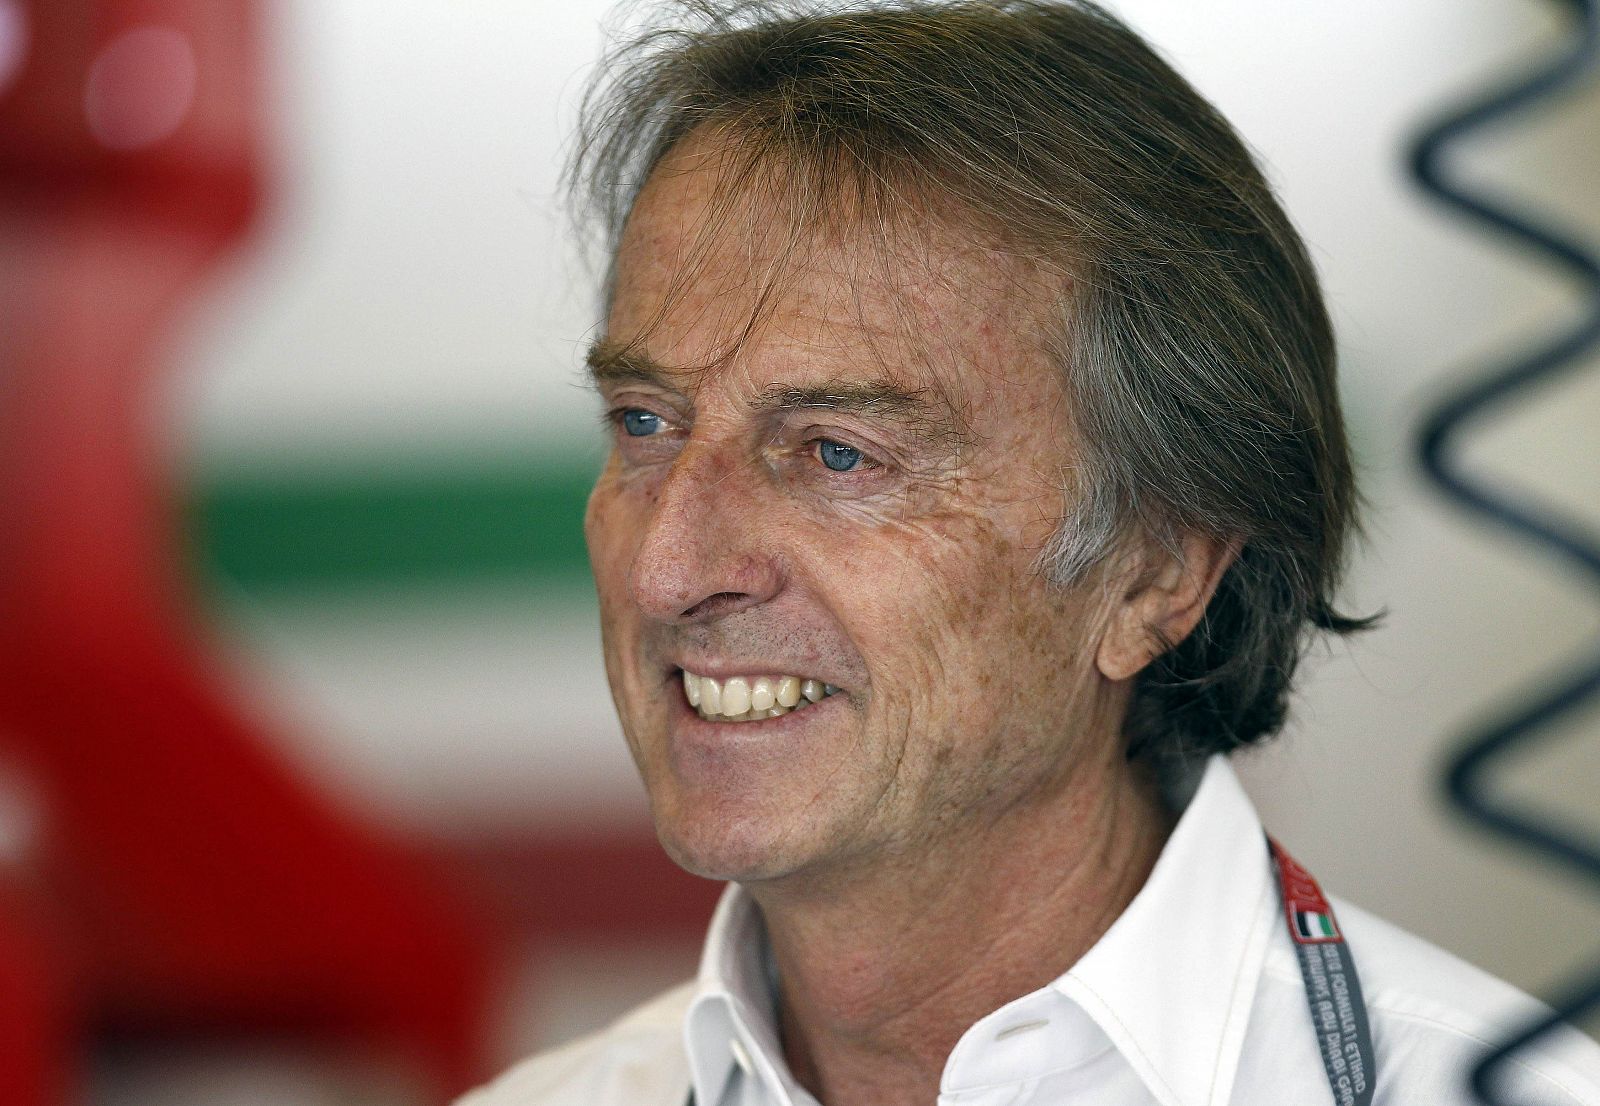 File photo of Ferrari President Luca di Montezemolo smiling in the pits during the a practice session of the Abu Dhabi F1 Grand Prix